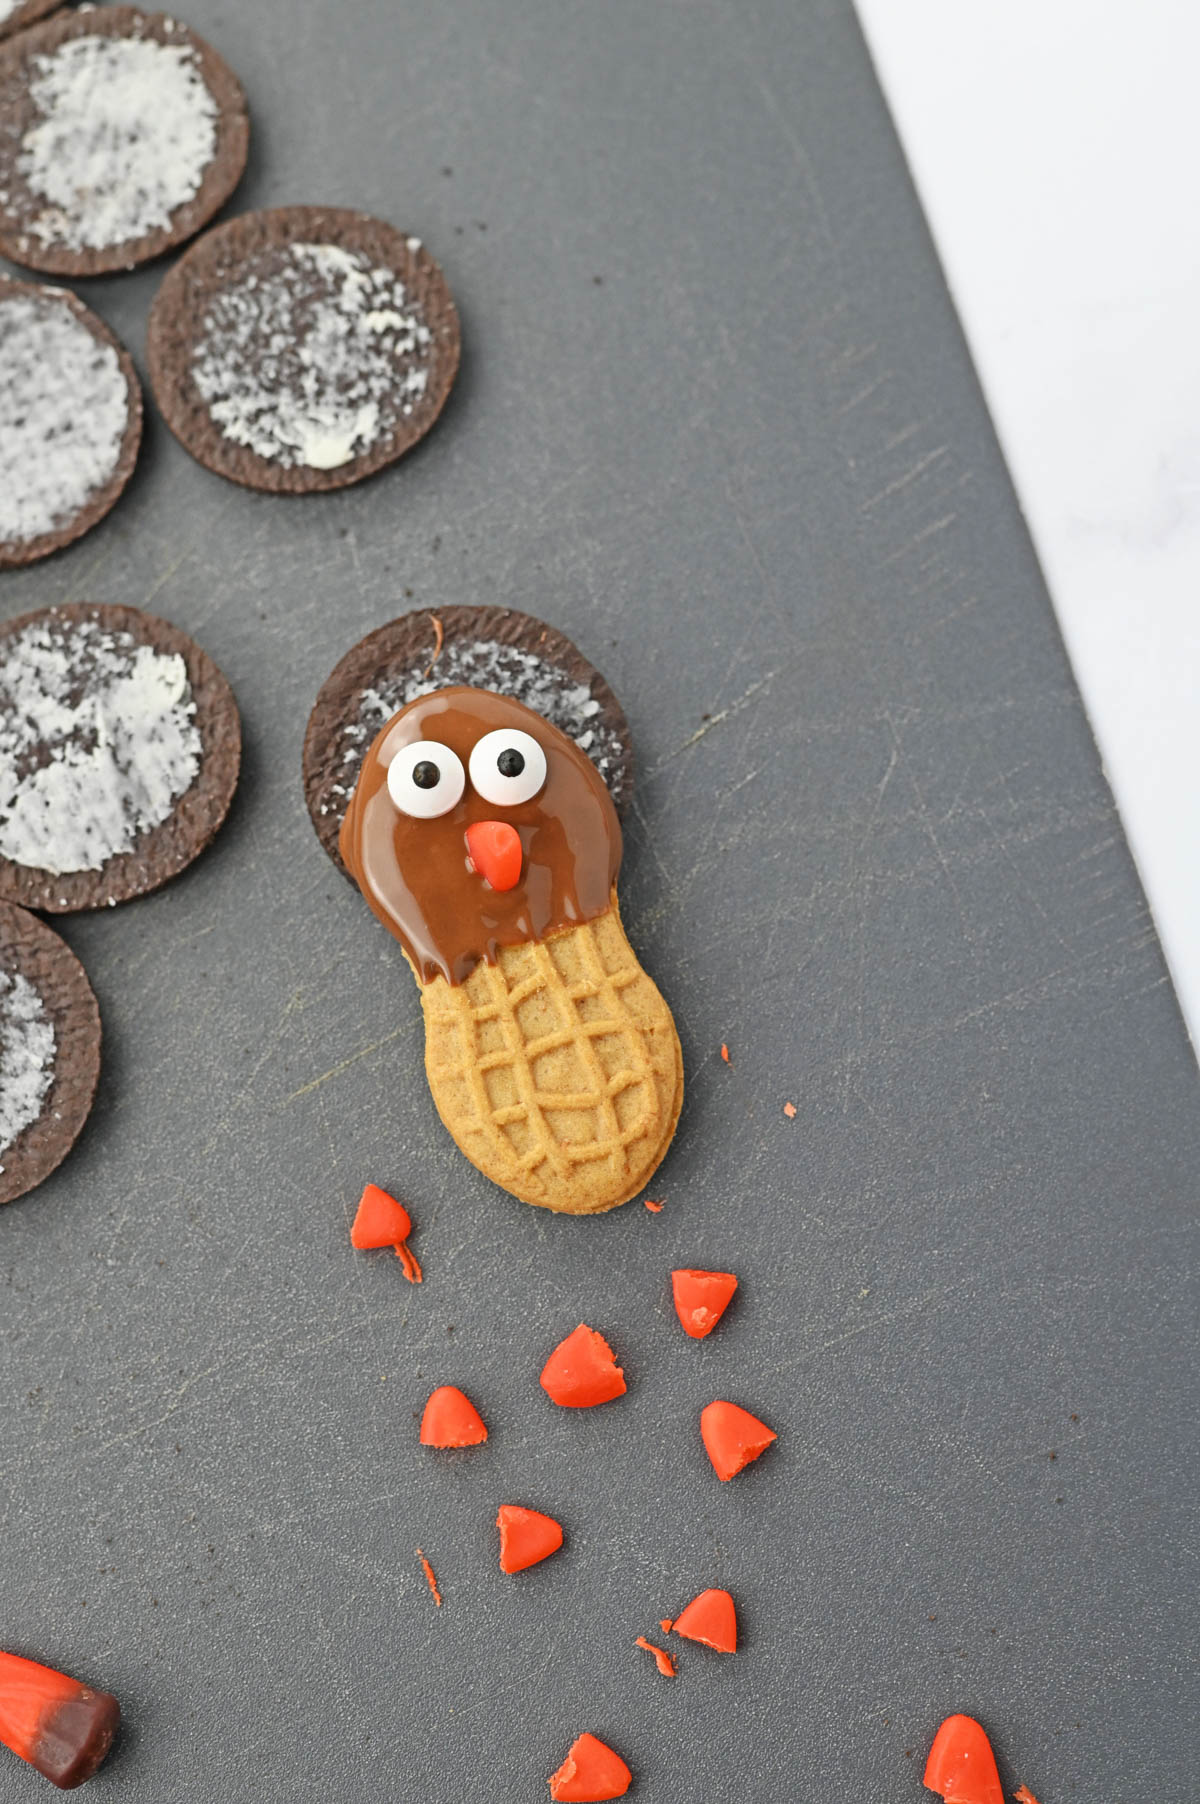 A tray of cookies with a turkey on it.